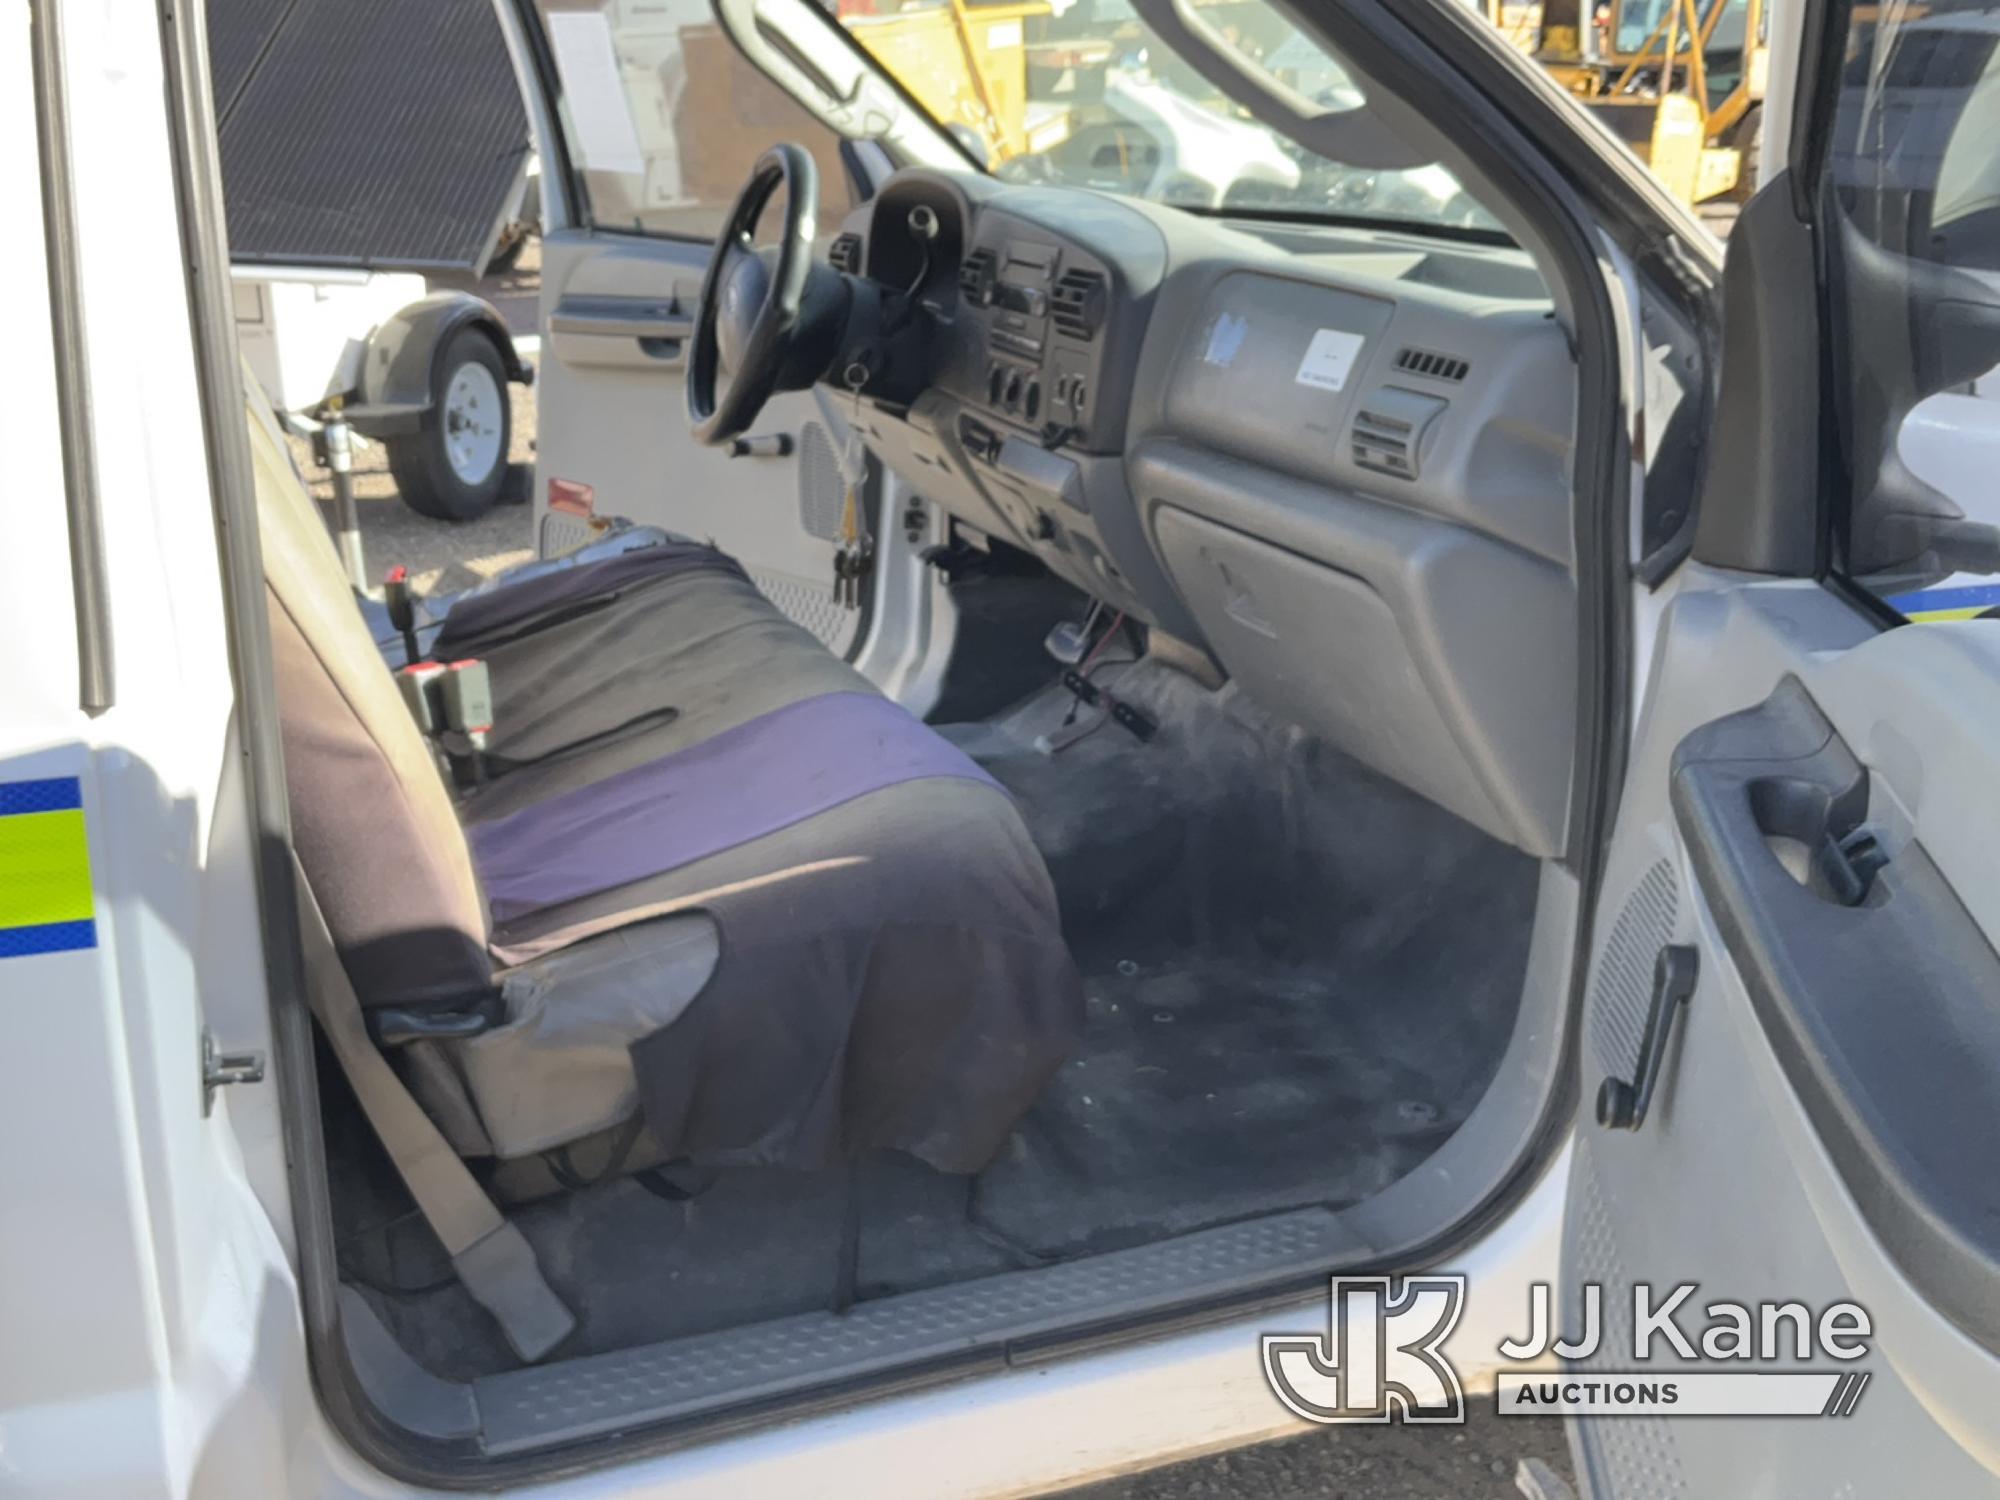 (McCarran, NV) 2005 Ford F-250 Pickup Truck, Located In Reno Nv. Contact Nathan Tiedt To Preview 775